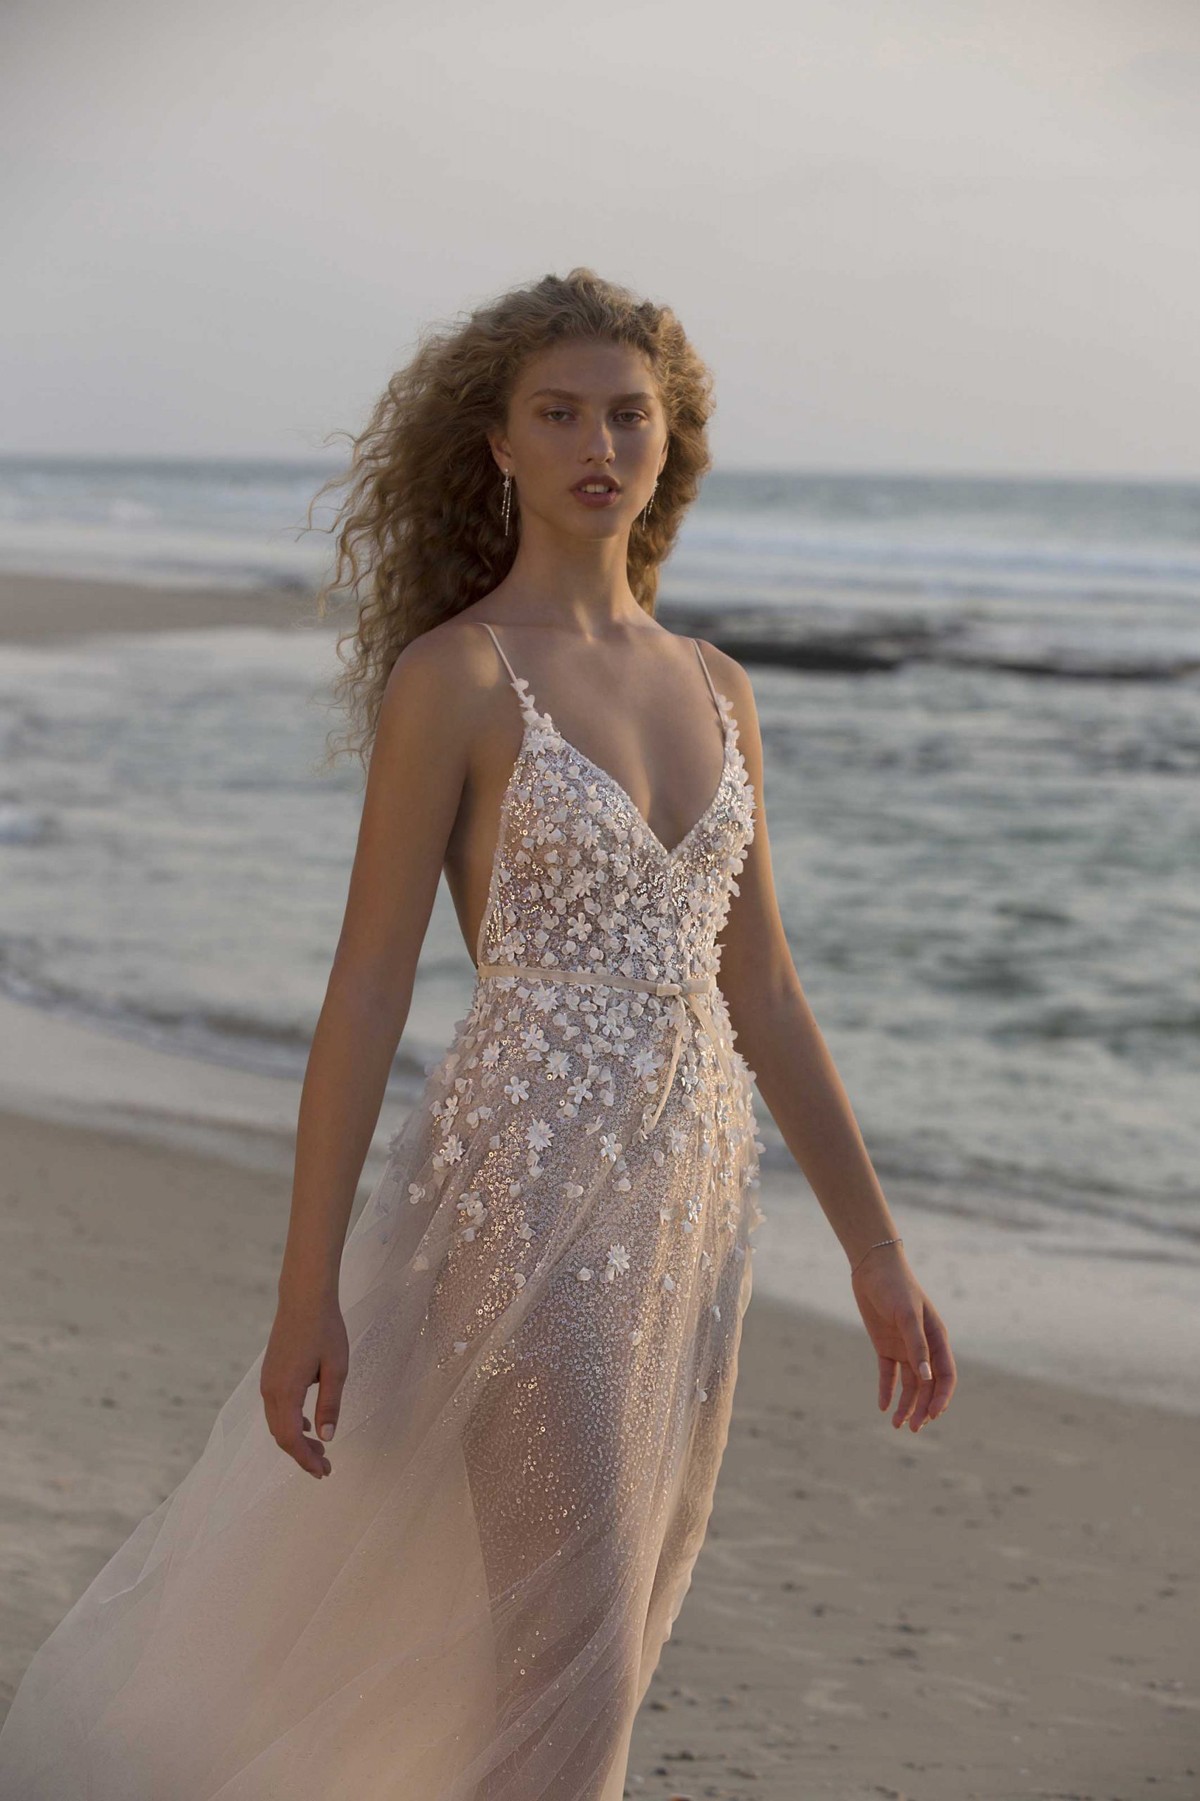 21-HOLLIE Bridal Dress Inspirated By Berta Muse 2021 Vista Mare Collection